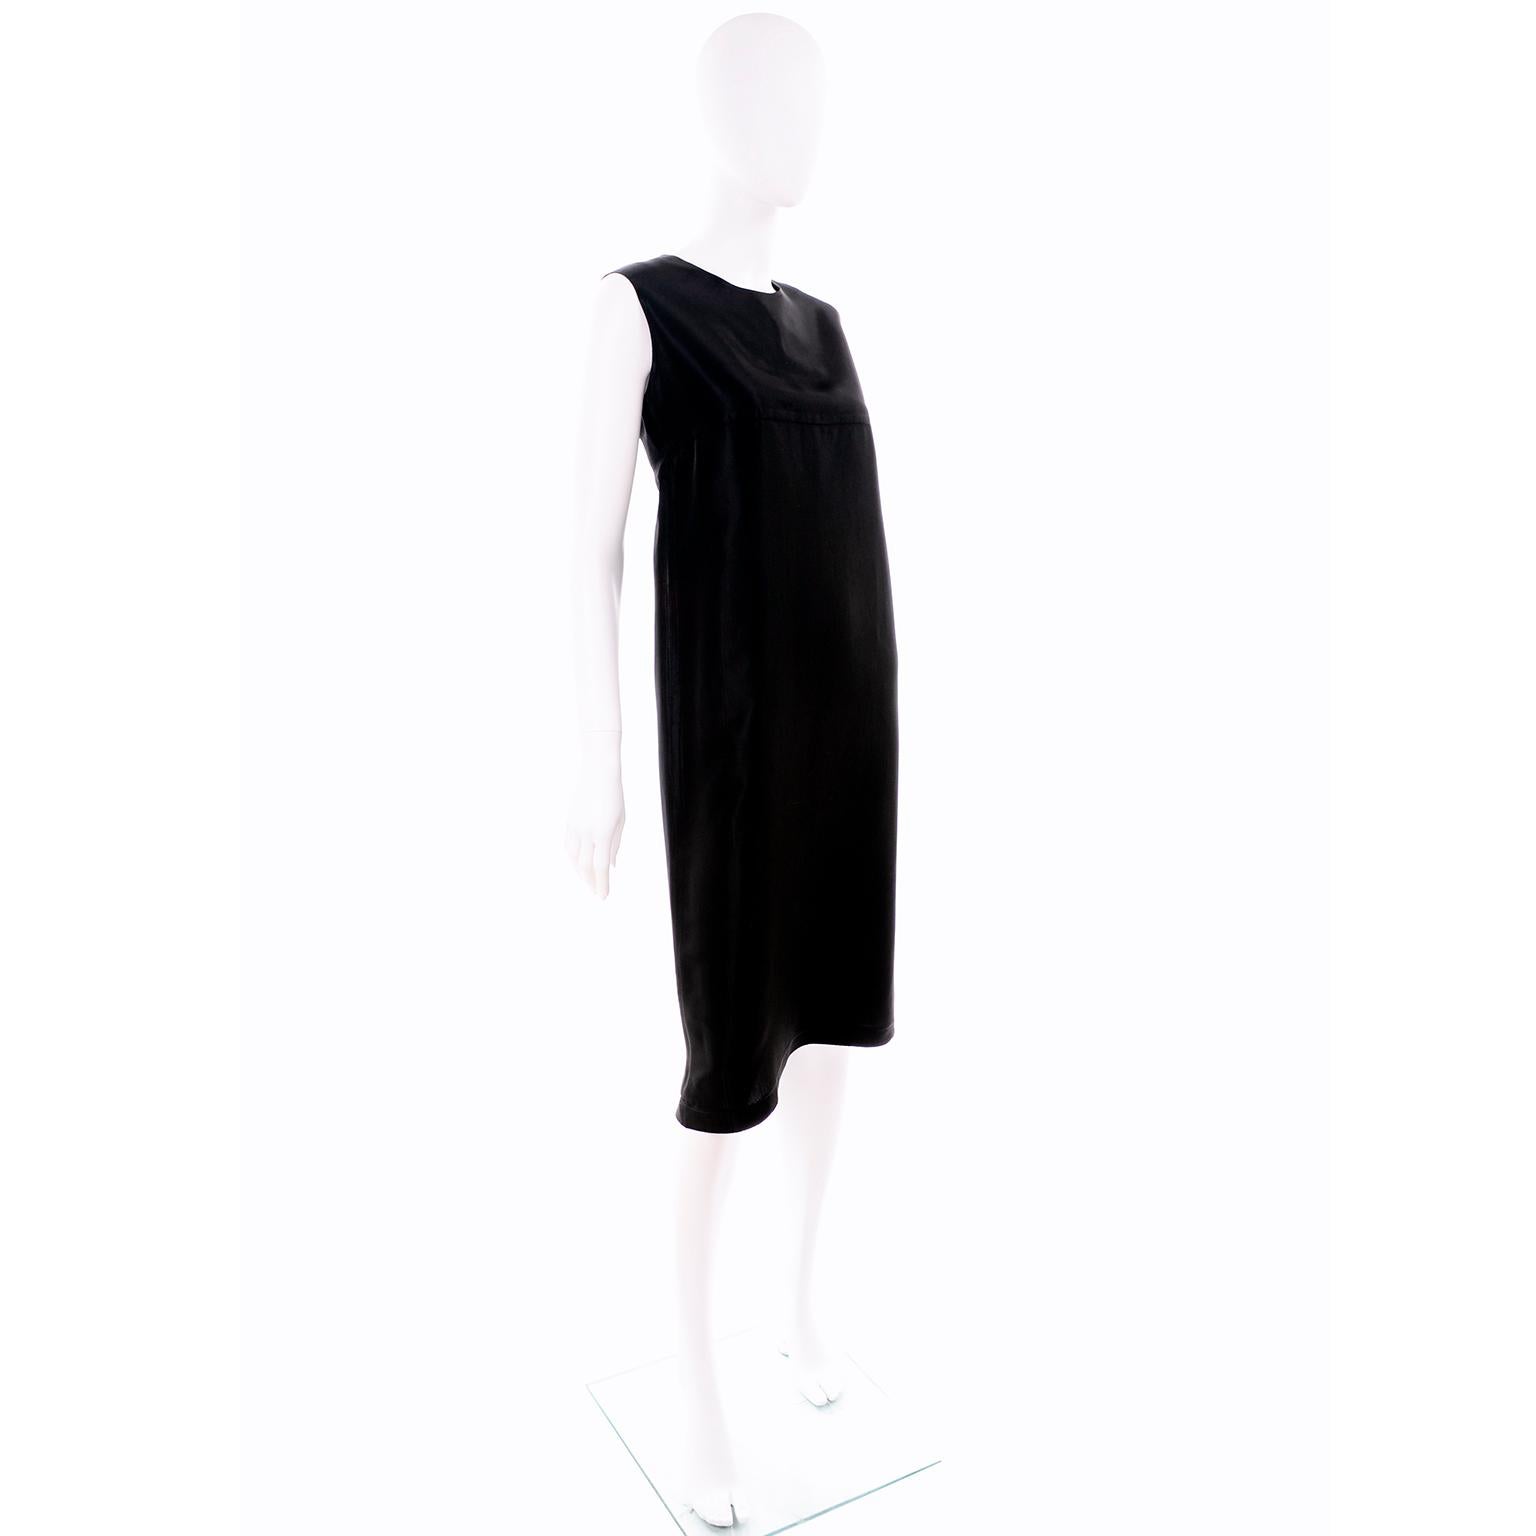 Yohji Yamamoto +Noir Sleeveless Black Textured Rayon Column Dress In Excellent Condition For Sale In Portland, OR